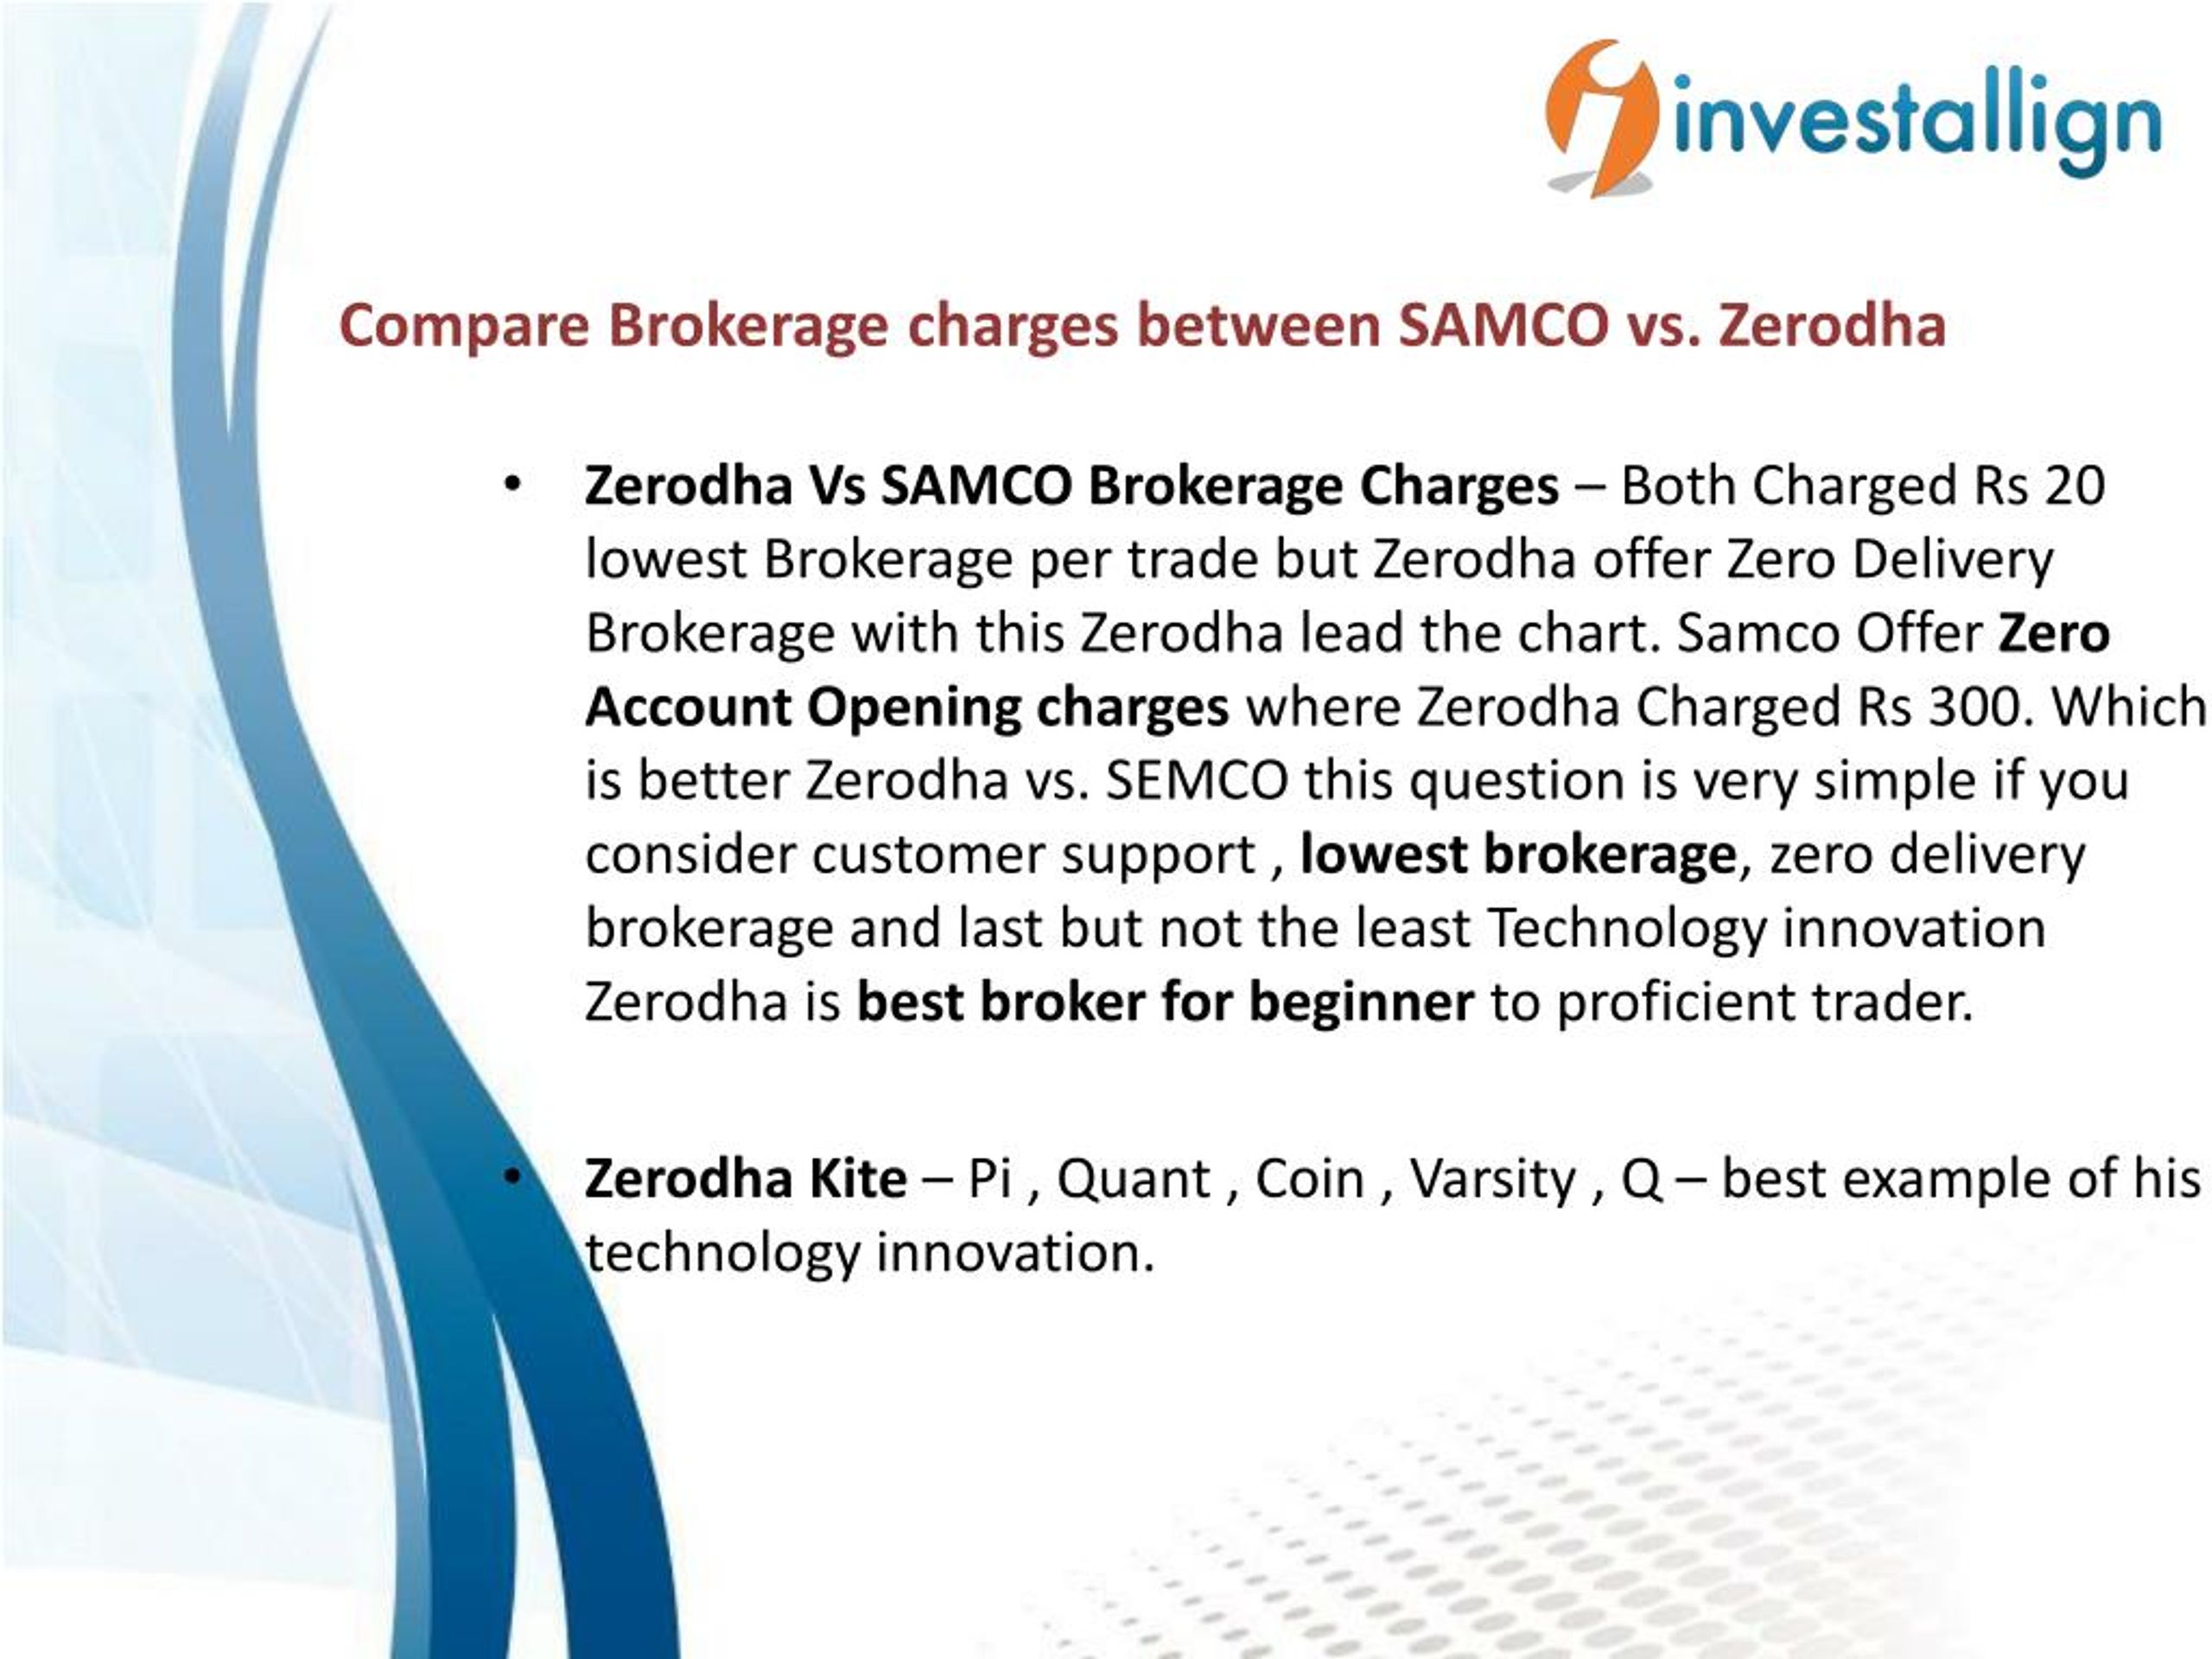 Ppt Compare Zerodha Vs Samco Brokerage Charges Investallign Powerpoint Presentation Id7820446 6204